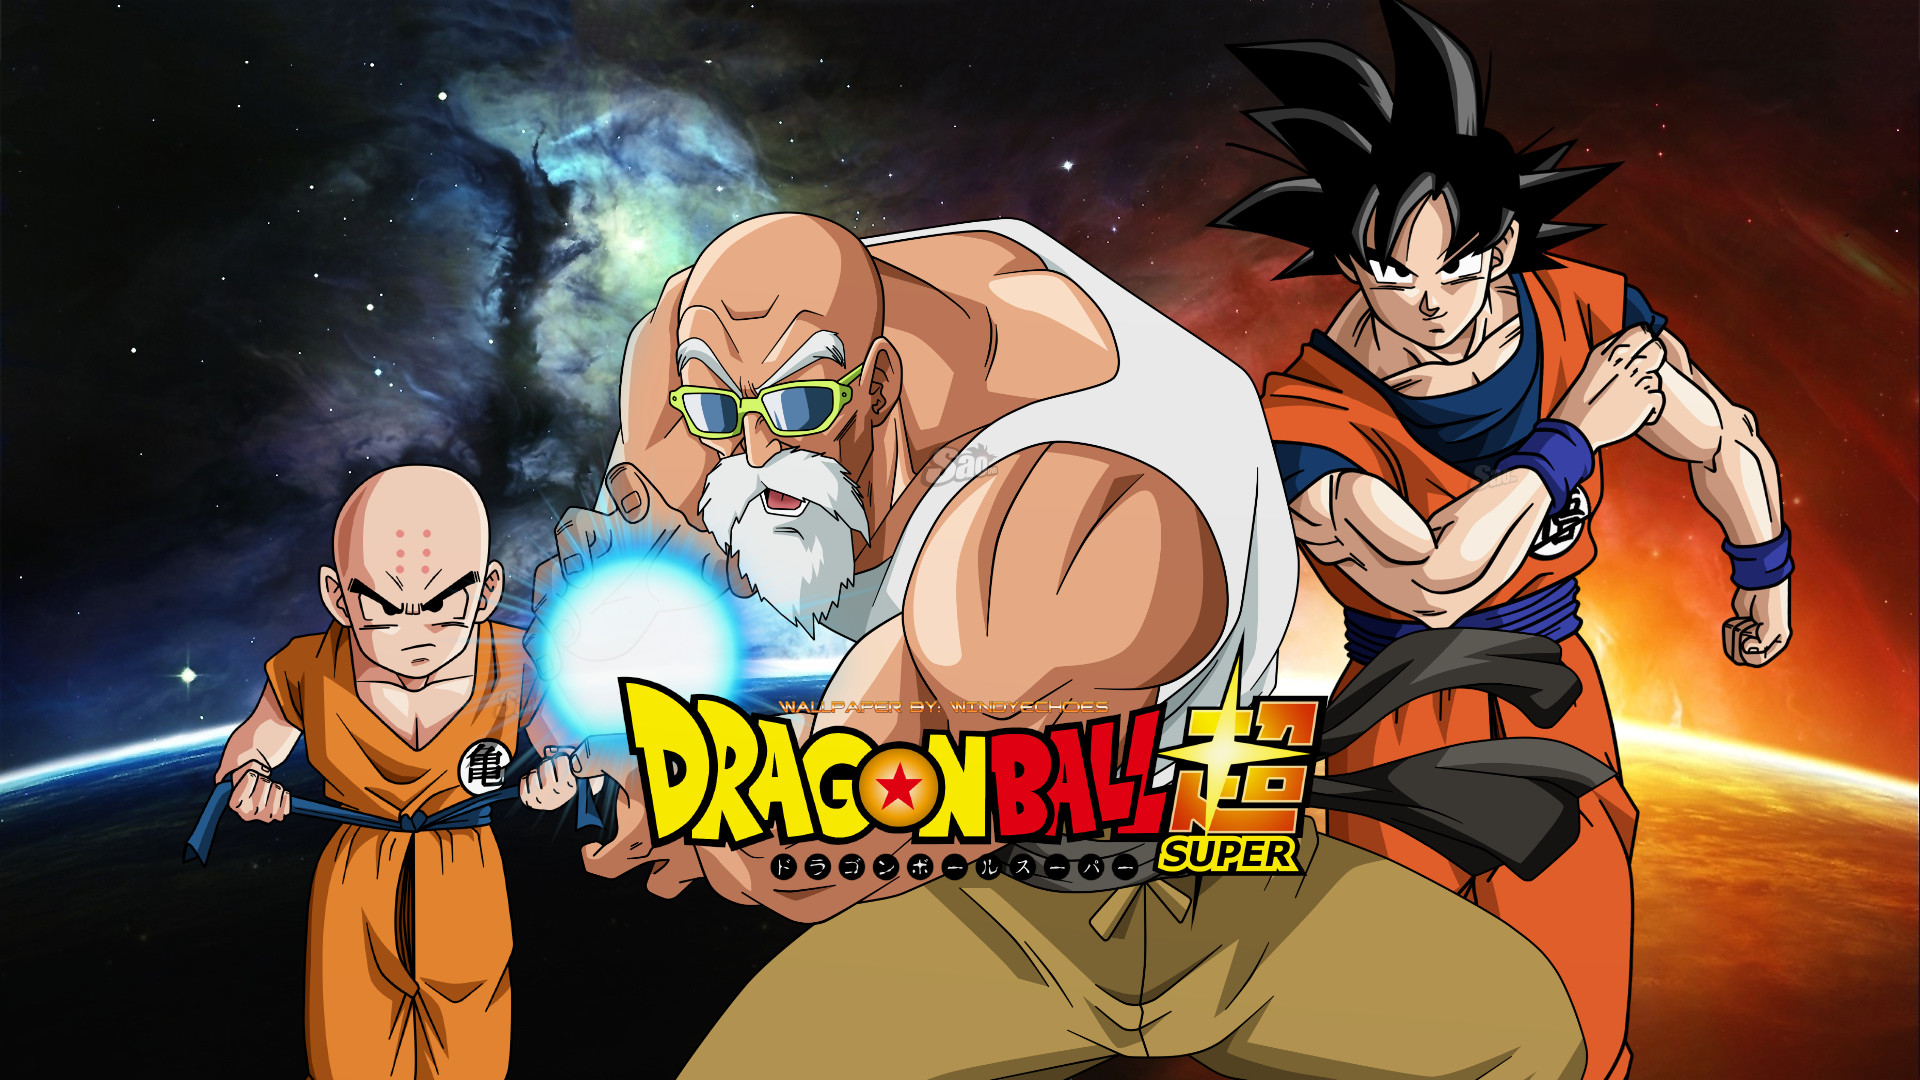 1920x1080 ... Krillin And Goku - KAME Style Wallpaper by WindyEchoes